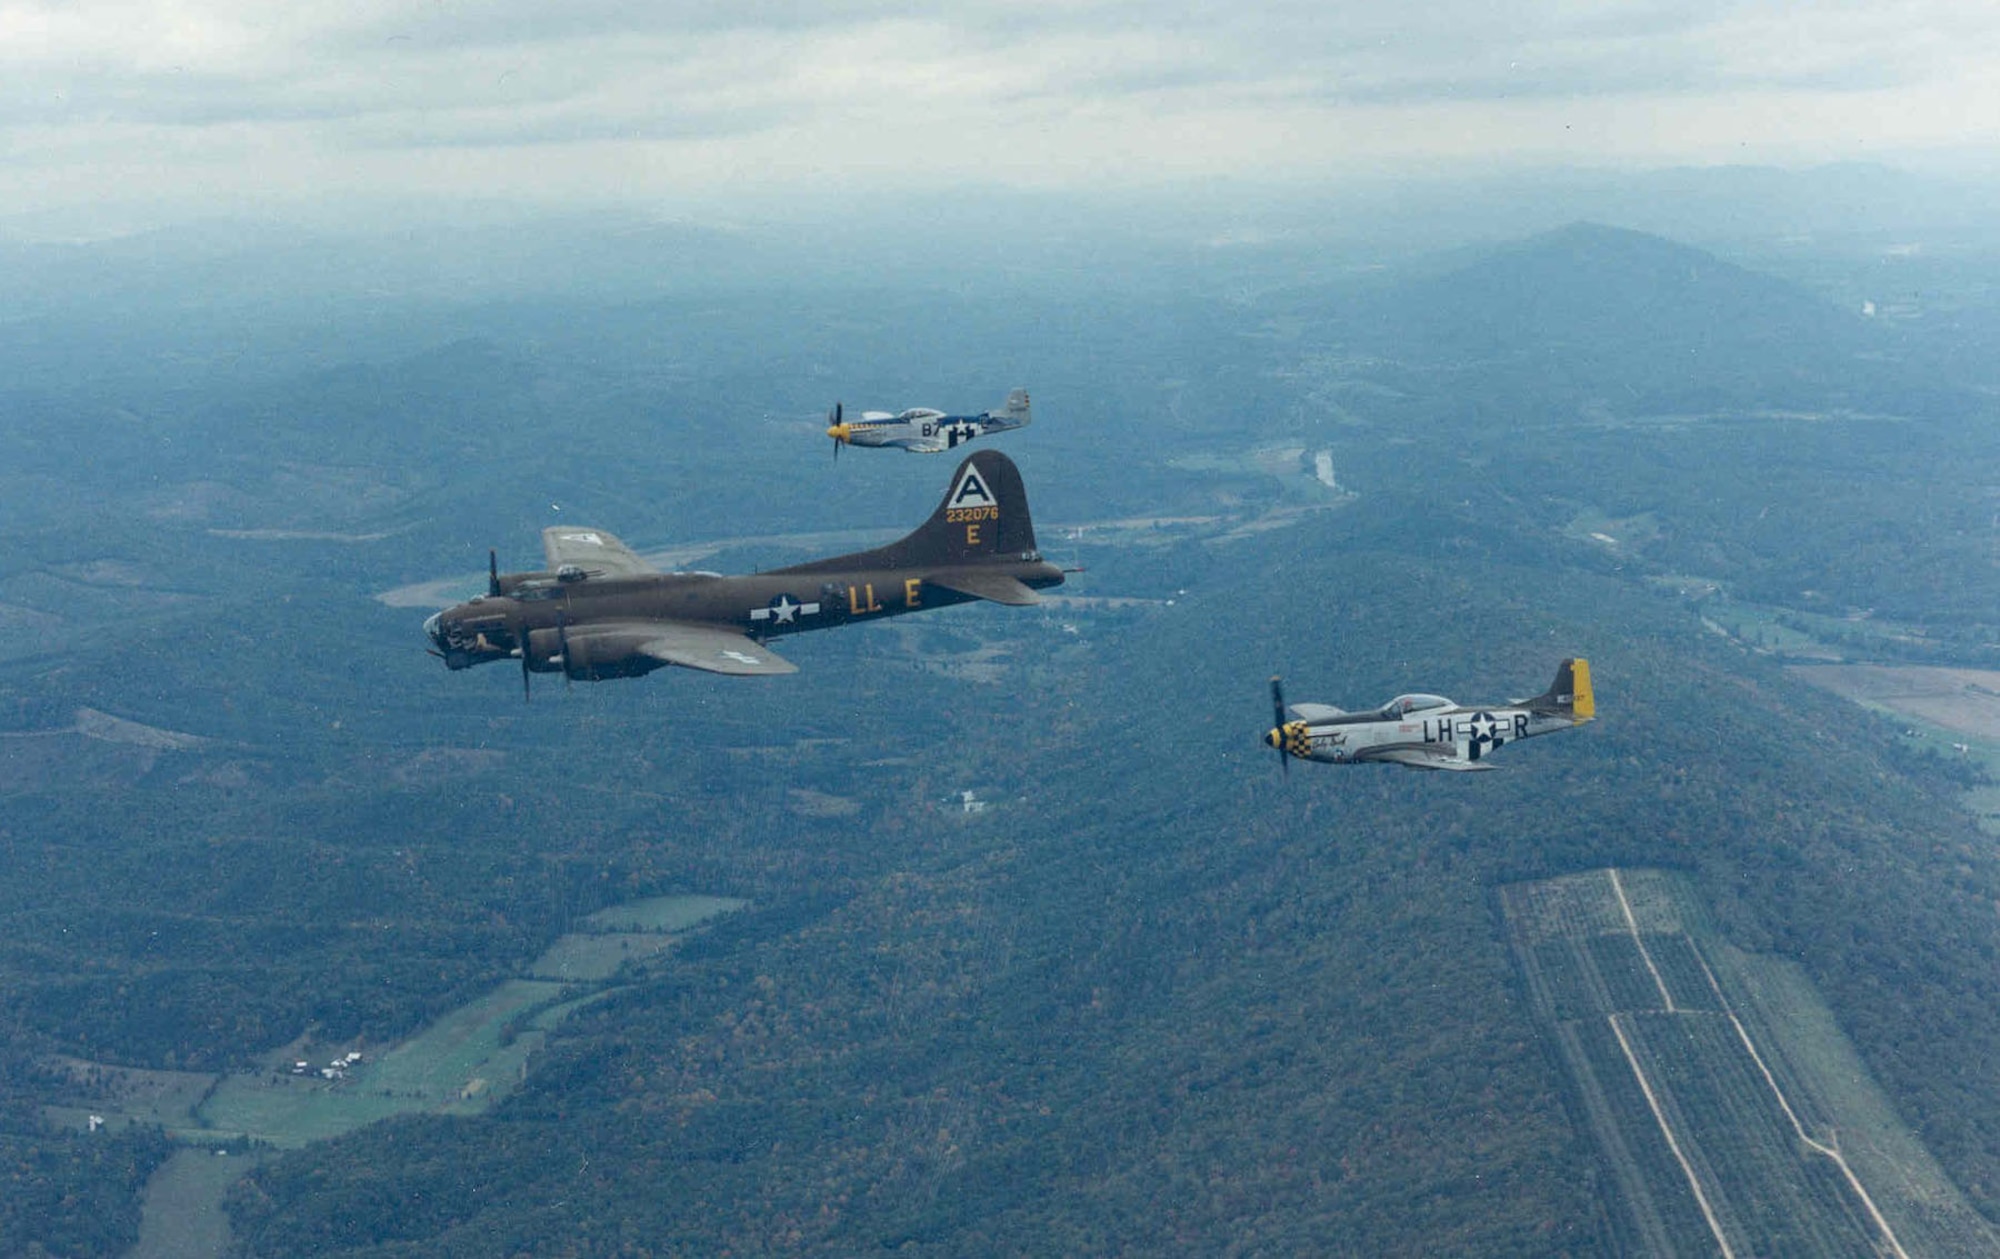 Boeing B-17G "Shoo Shoo Shoo Baby" with P-51 escort during its flight to the National Museum of the United States Air Force on Oct. 12, 1988. (U.S. Air Force photo)